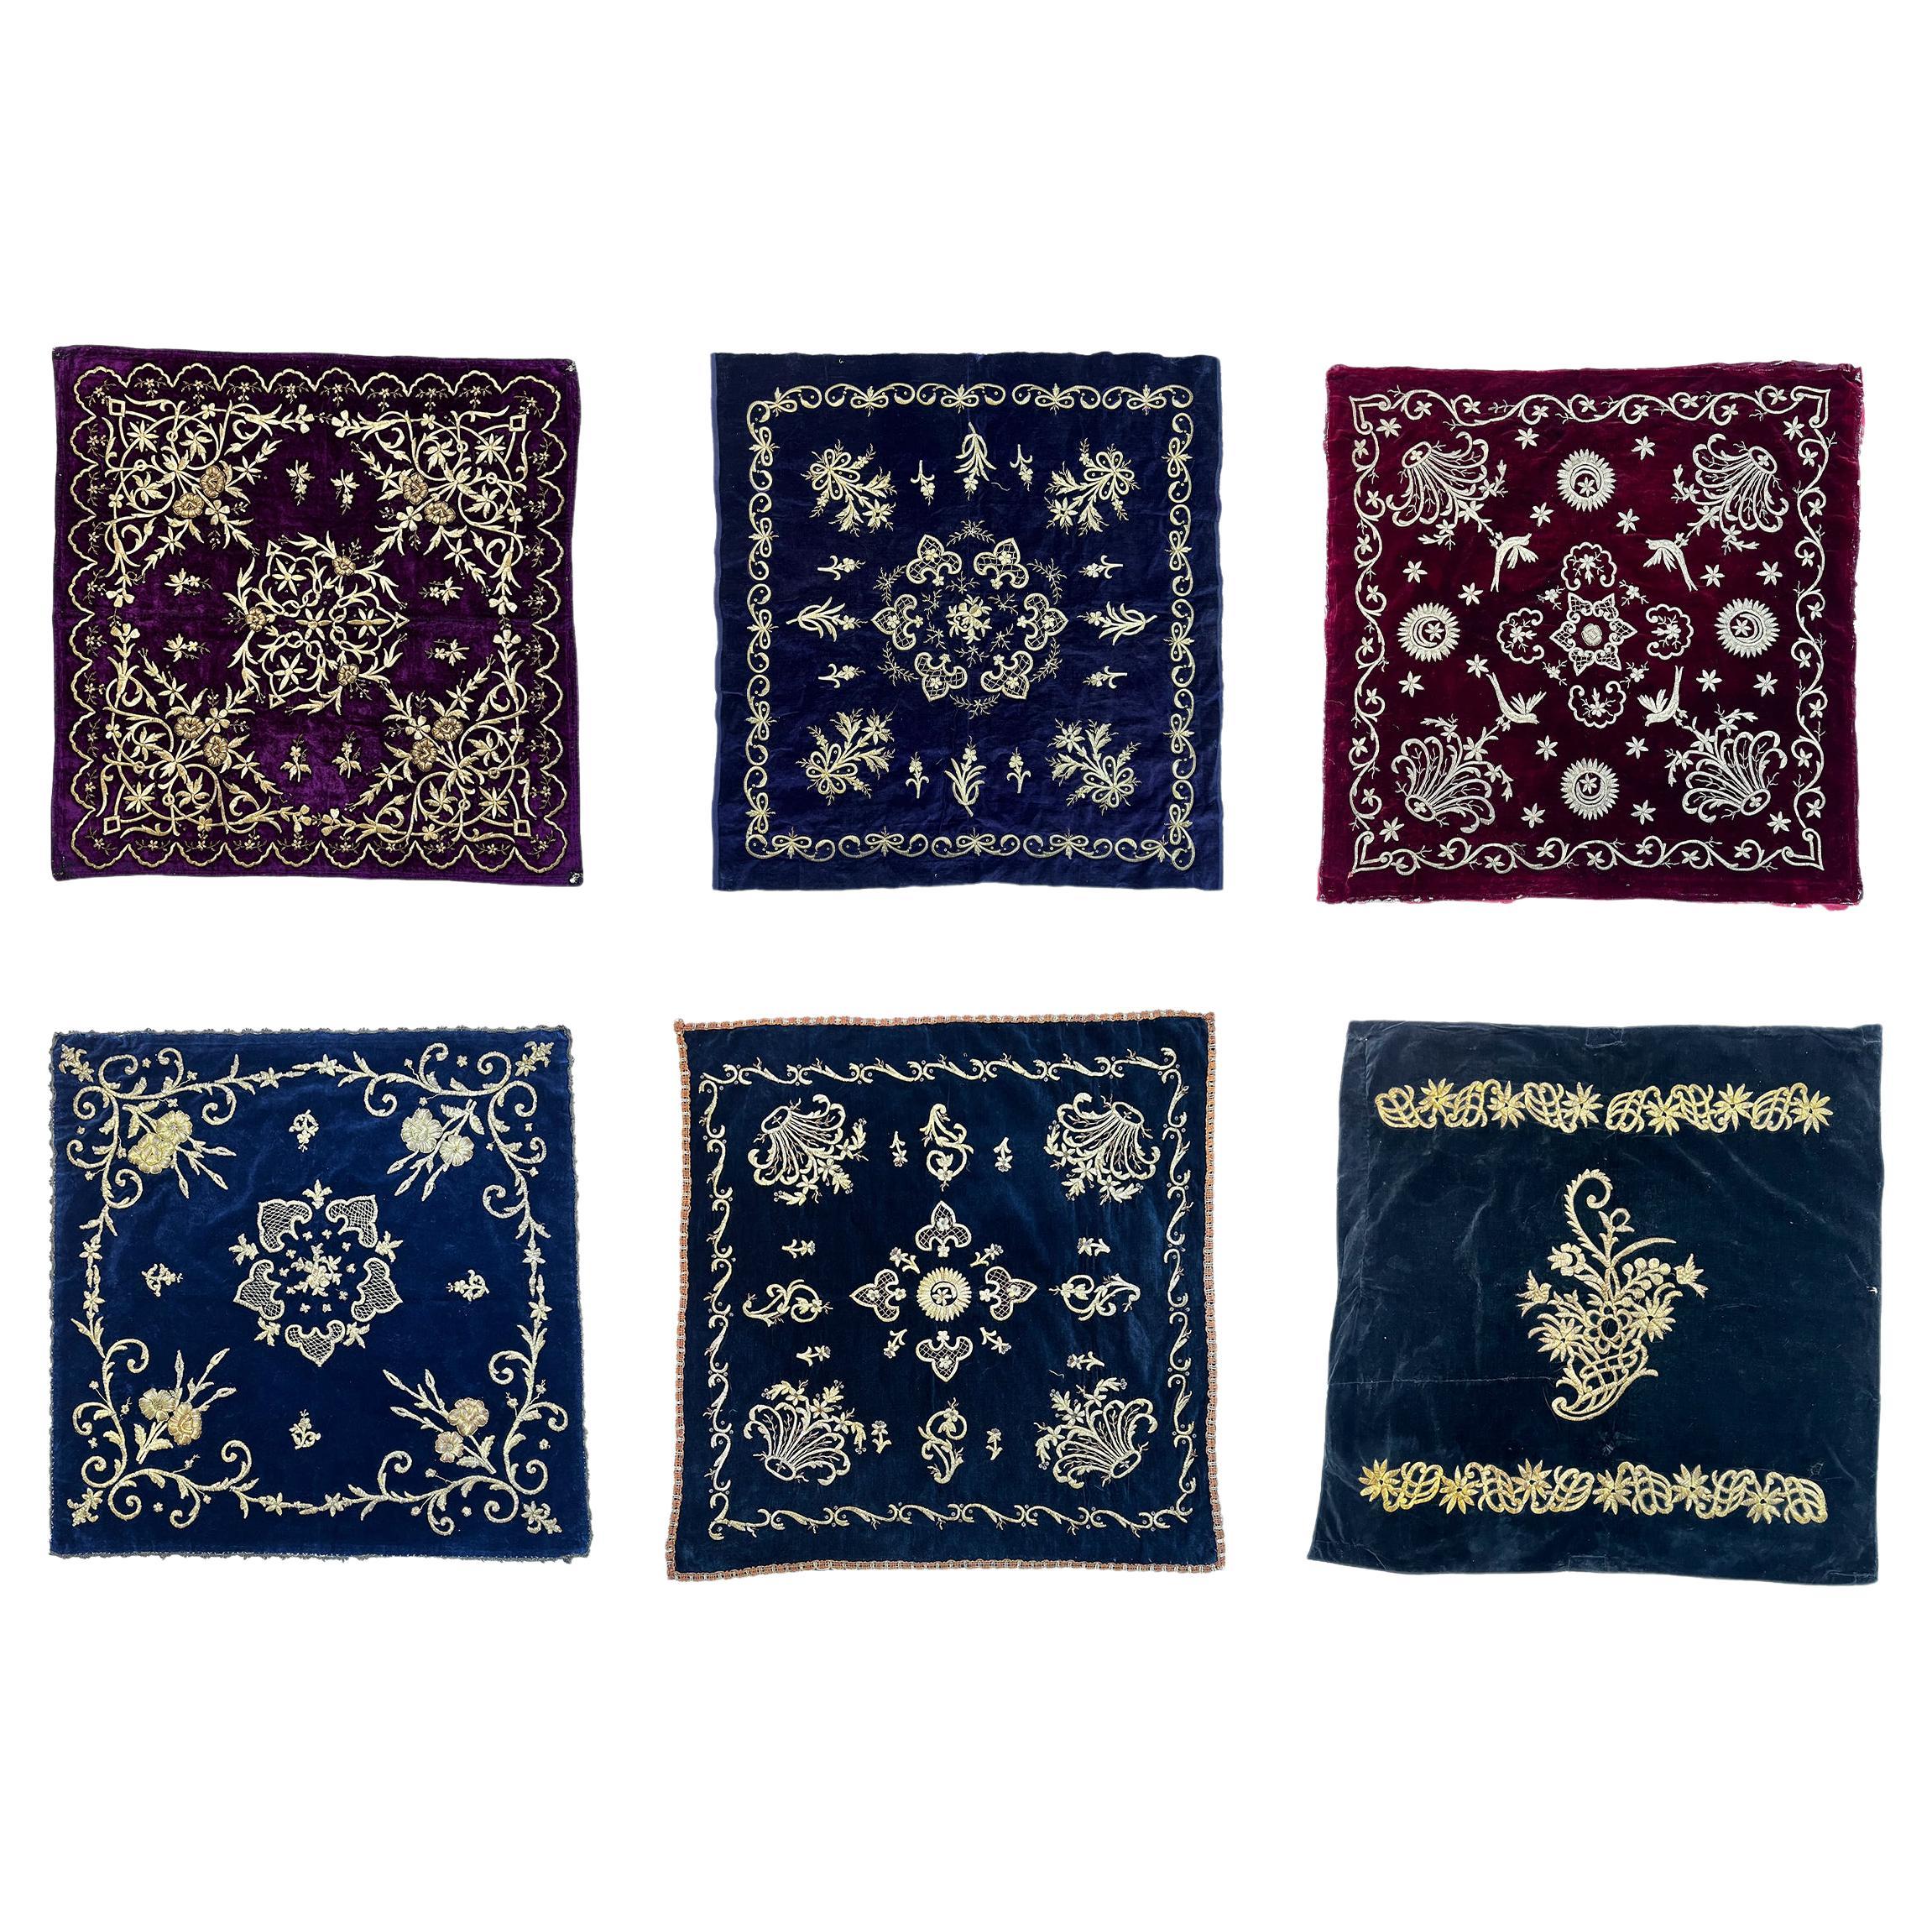 Collection of Ottoman Velvet and Metal-Thread Coverlet or Hanging, Turkey For Sale